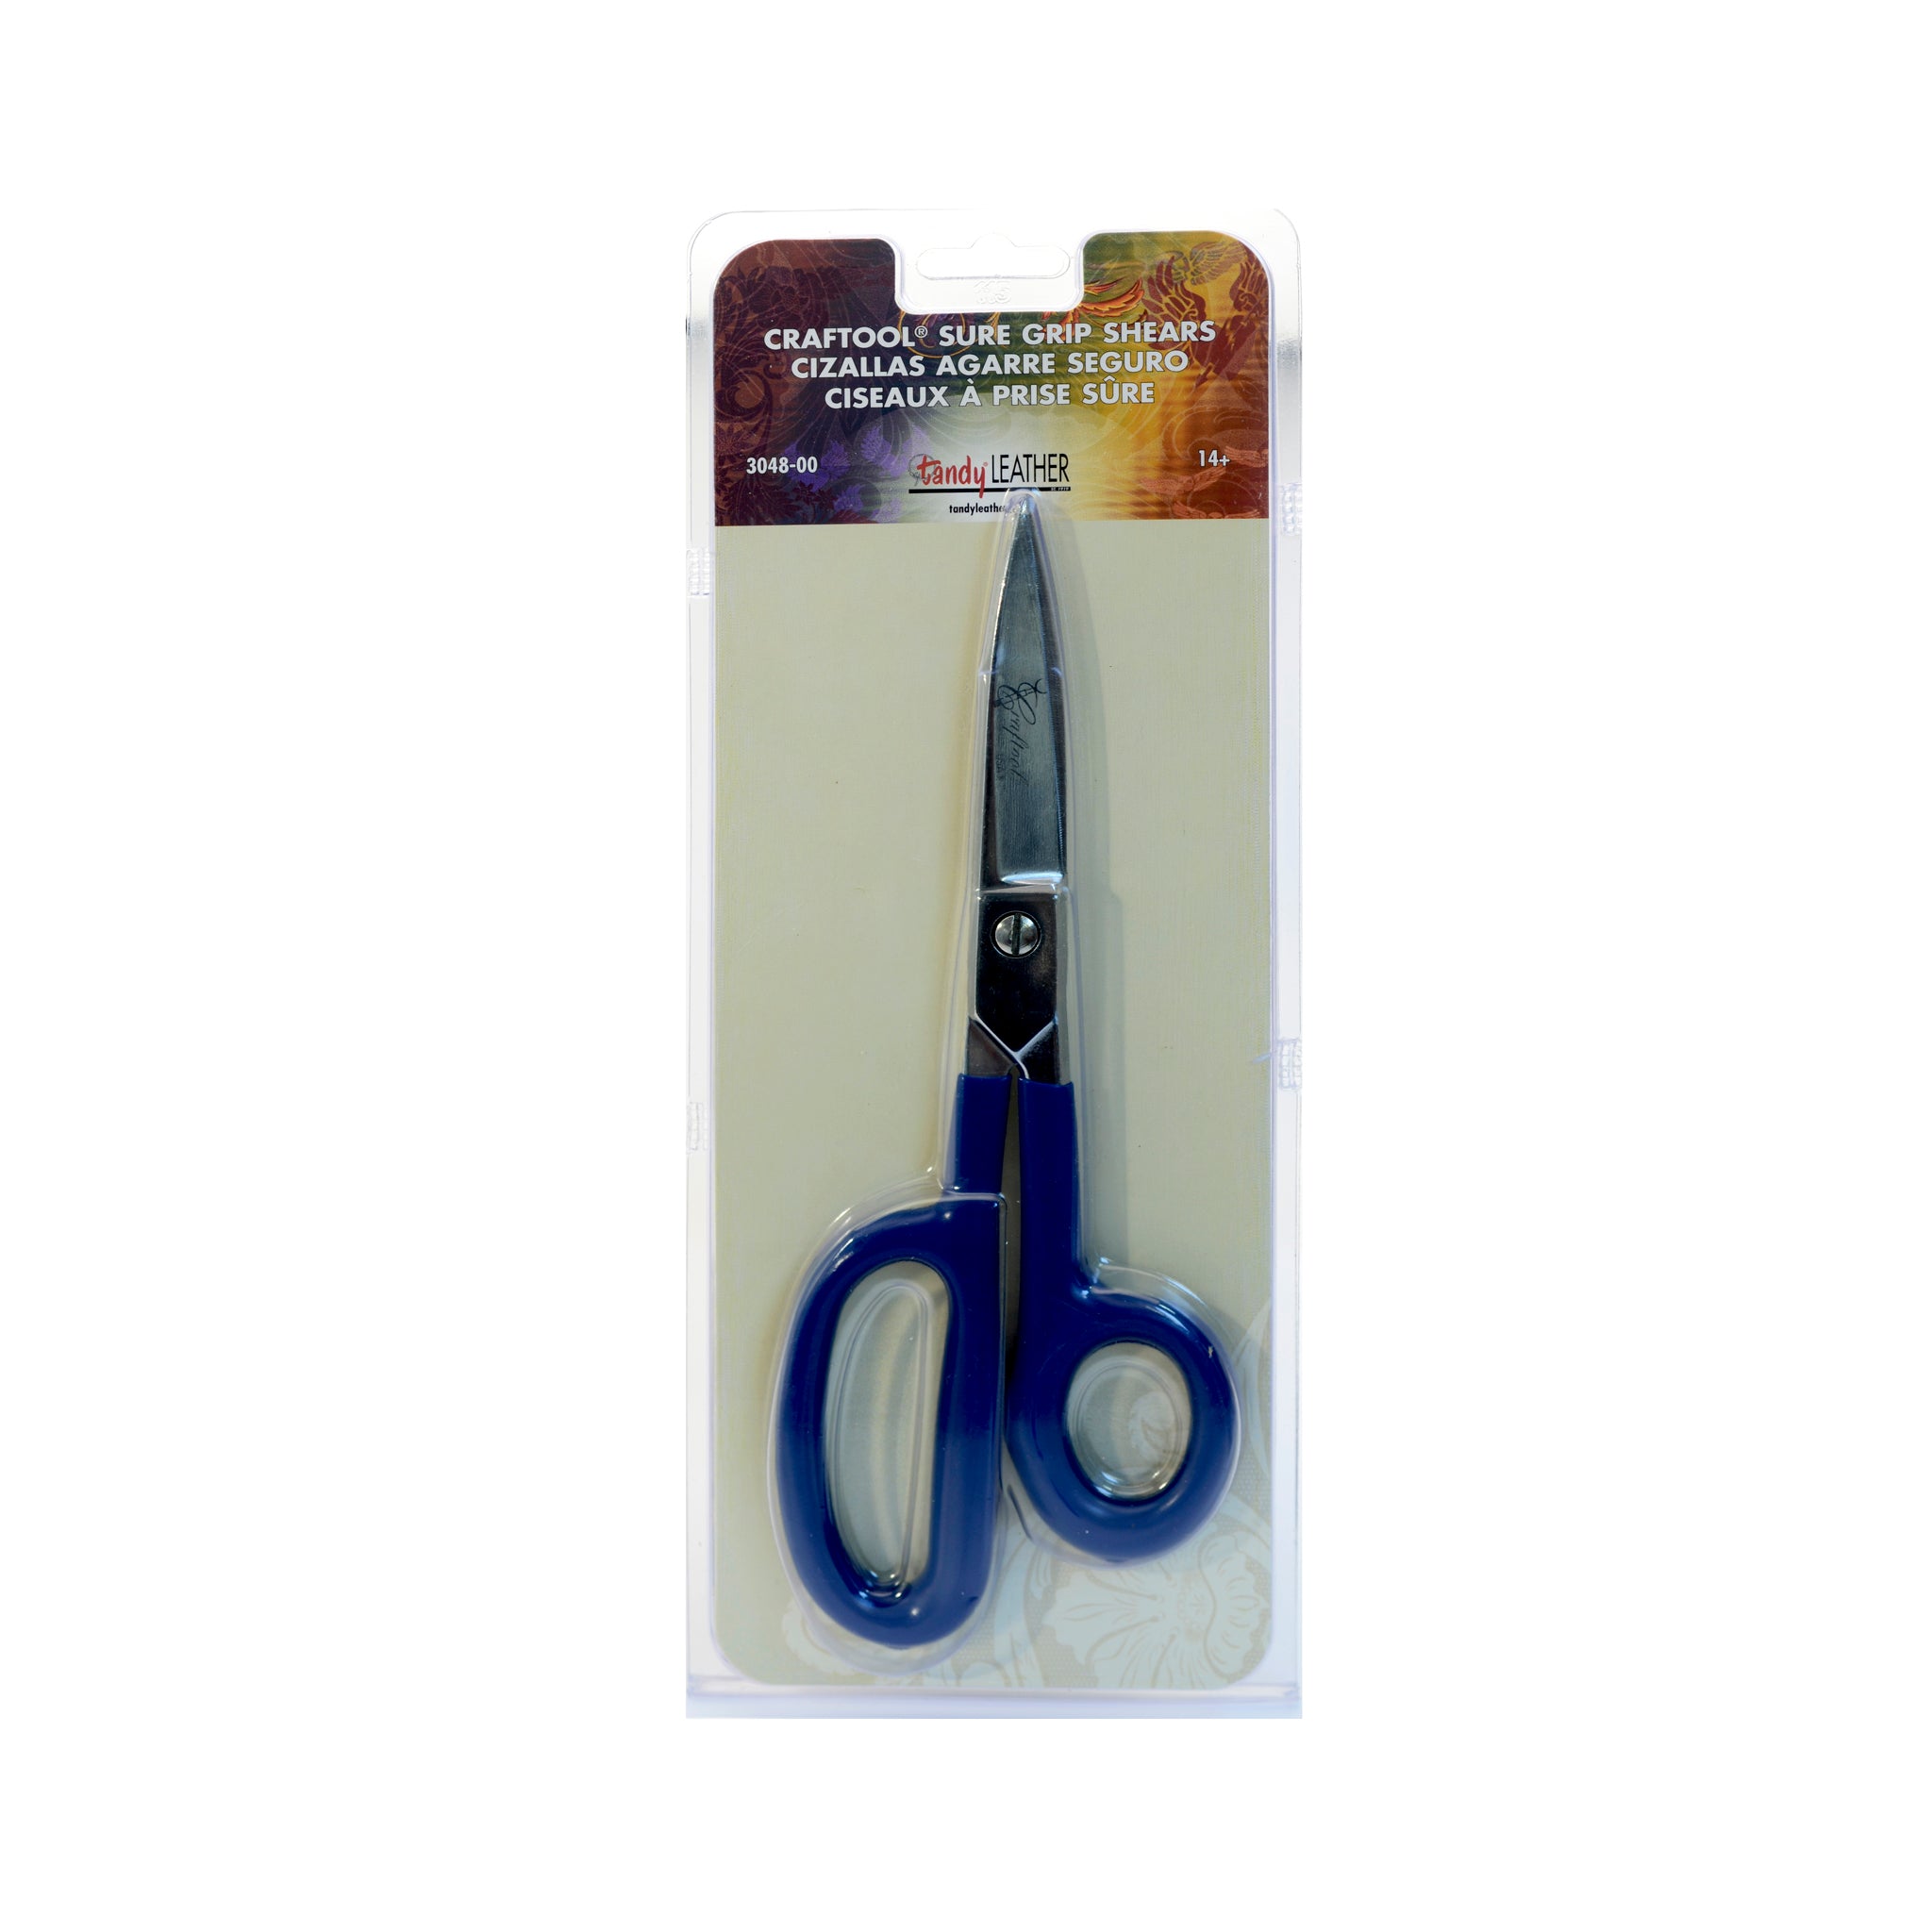 Sure Grip Shears from Identity Leathercraft